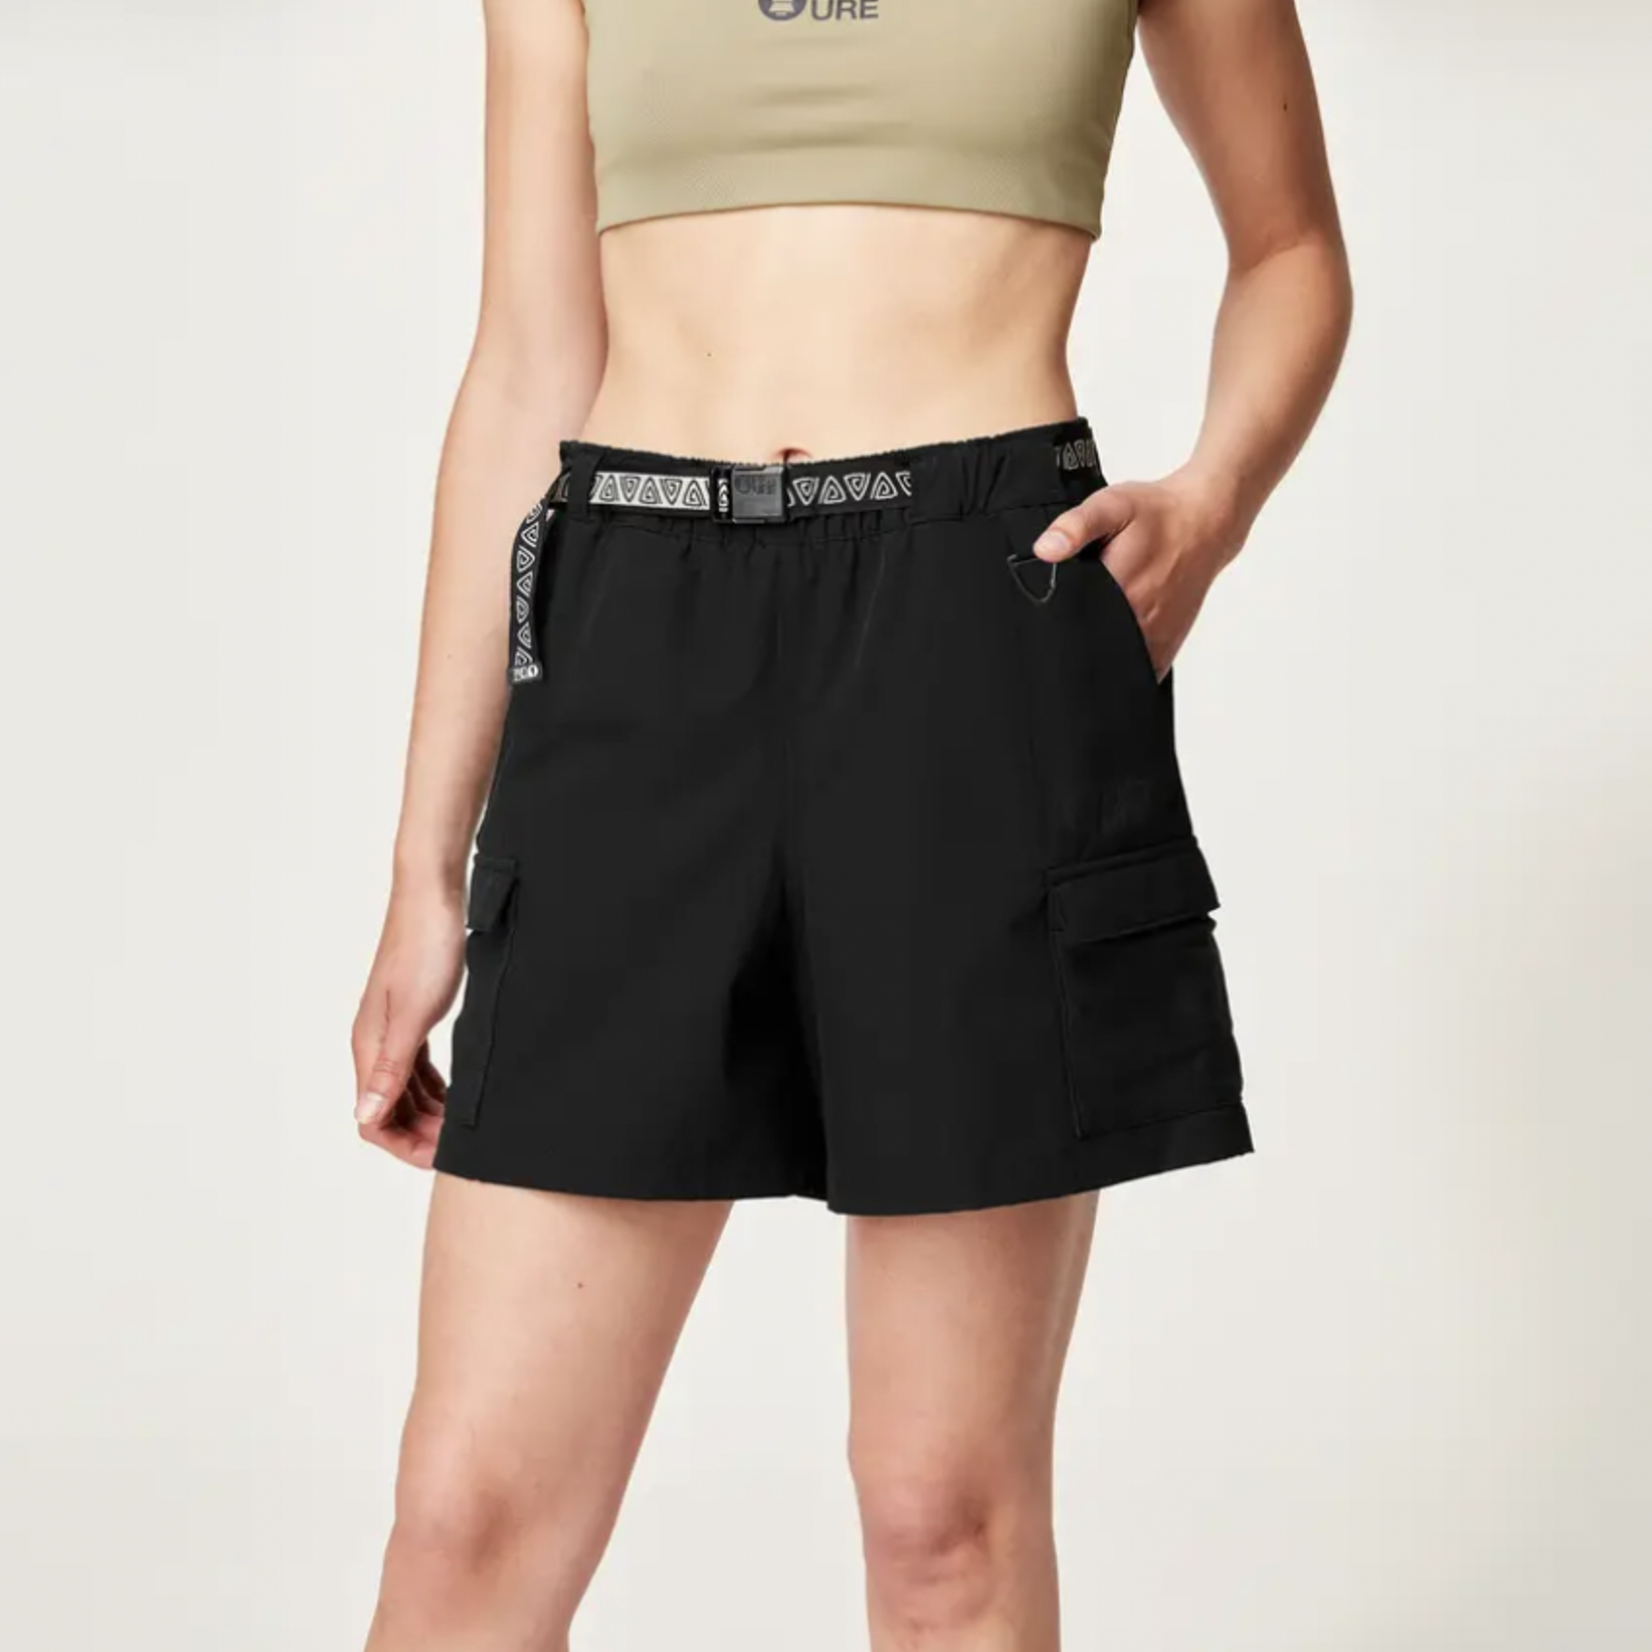 PICTURE W PICTURE CAMBA STRETCH SHORTS